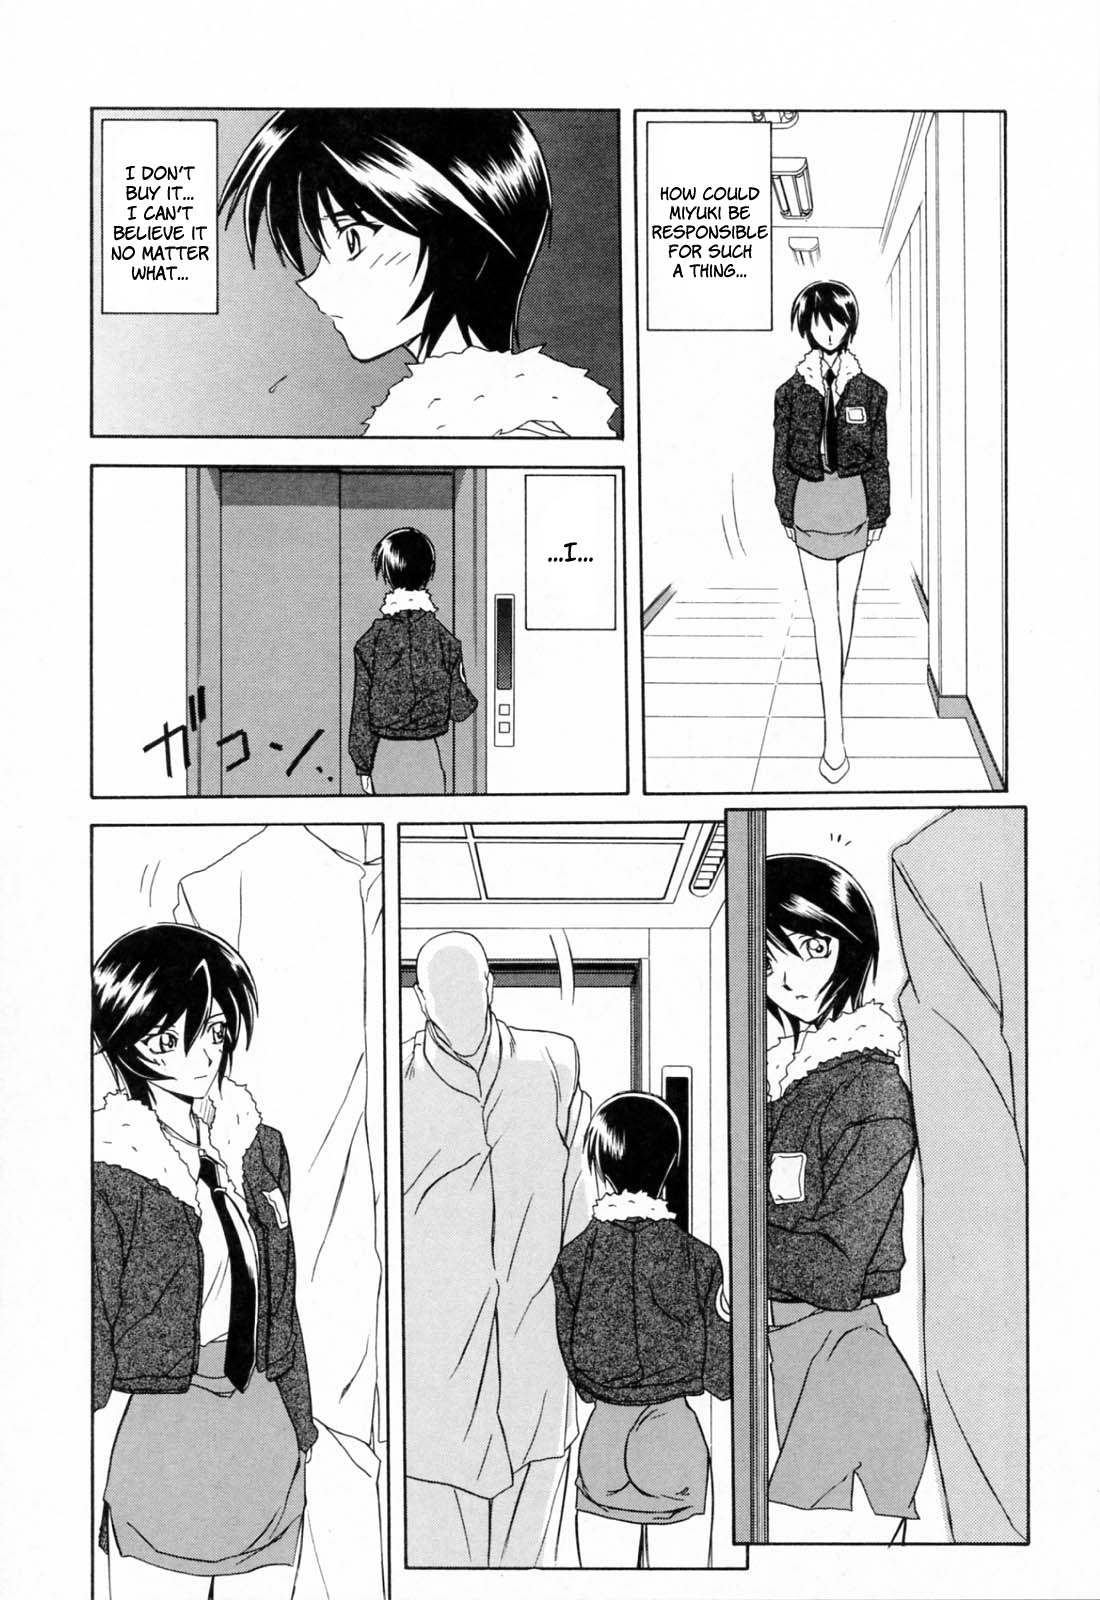 [Sanbun Kyoden] Readiness (English, Chap 1-13, Complete) [山文京伝] READINESS レディネス 章1-13 [英訳]